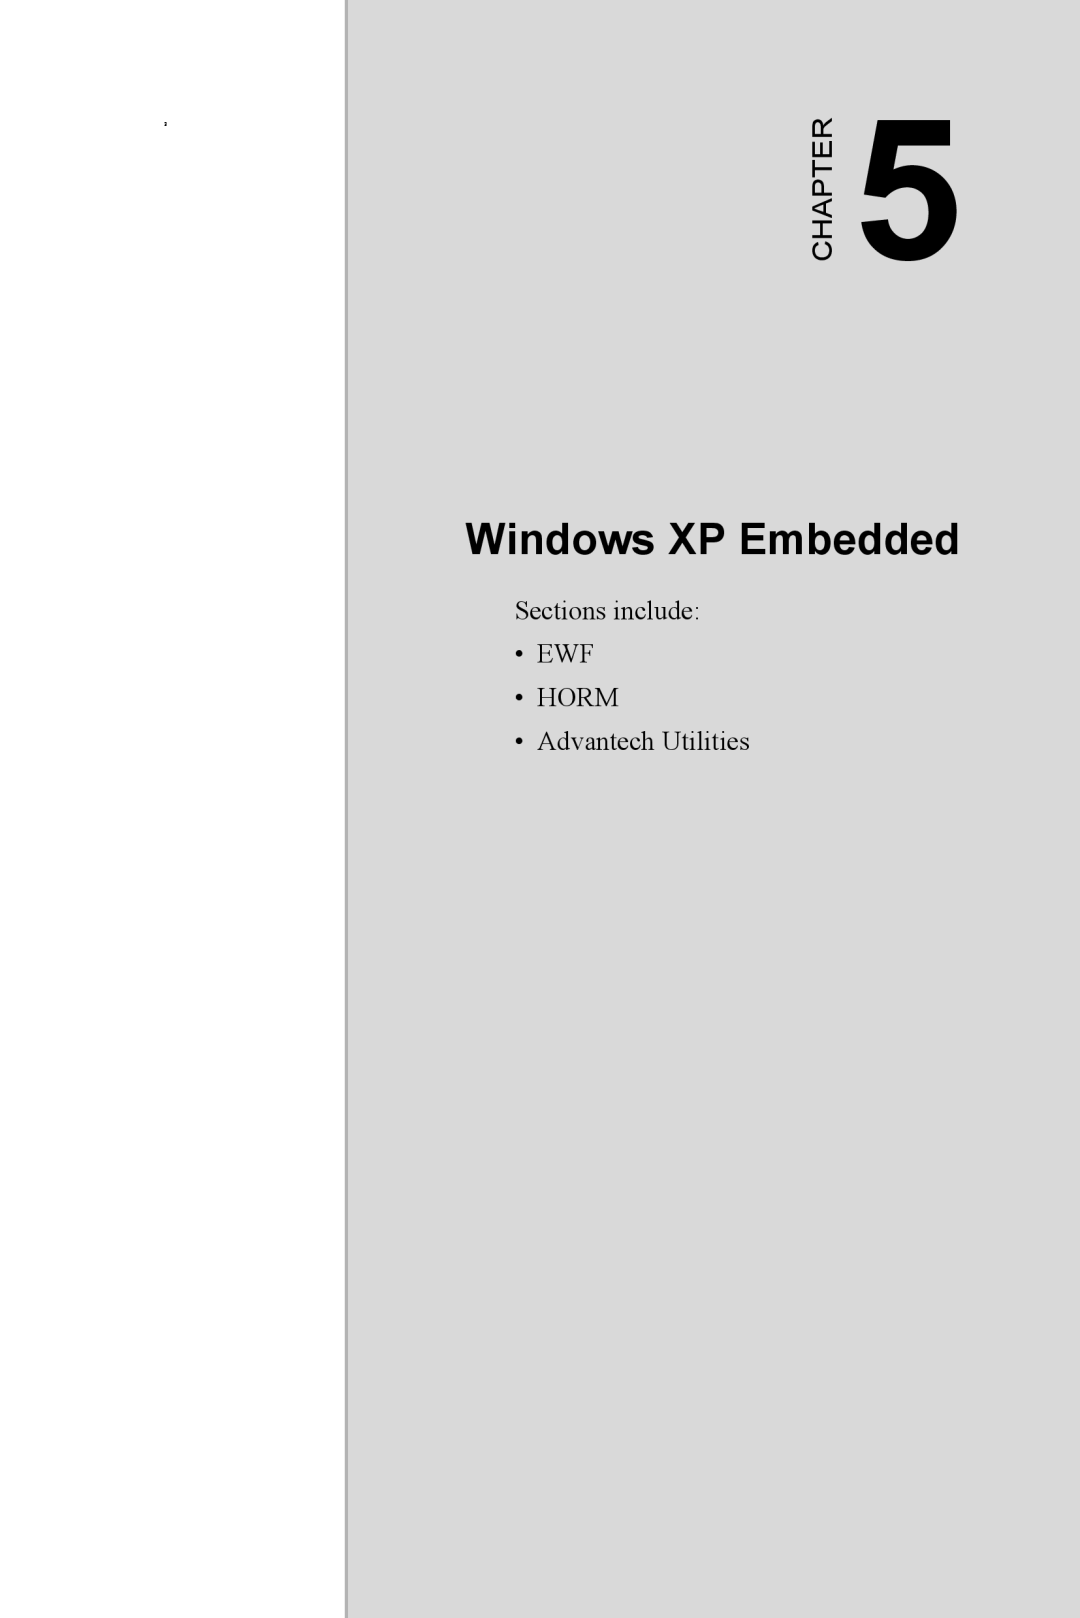 Intel TPC-1070 user manual Windows XP Embedded, Chapter, Sections include EWF HORM Advantech Utilities 